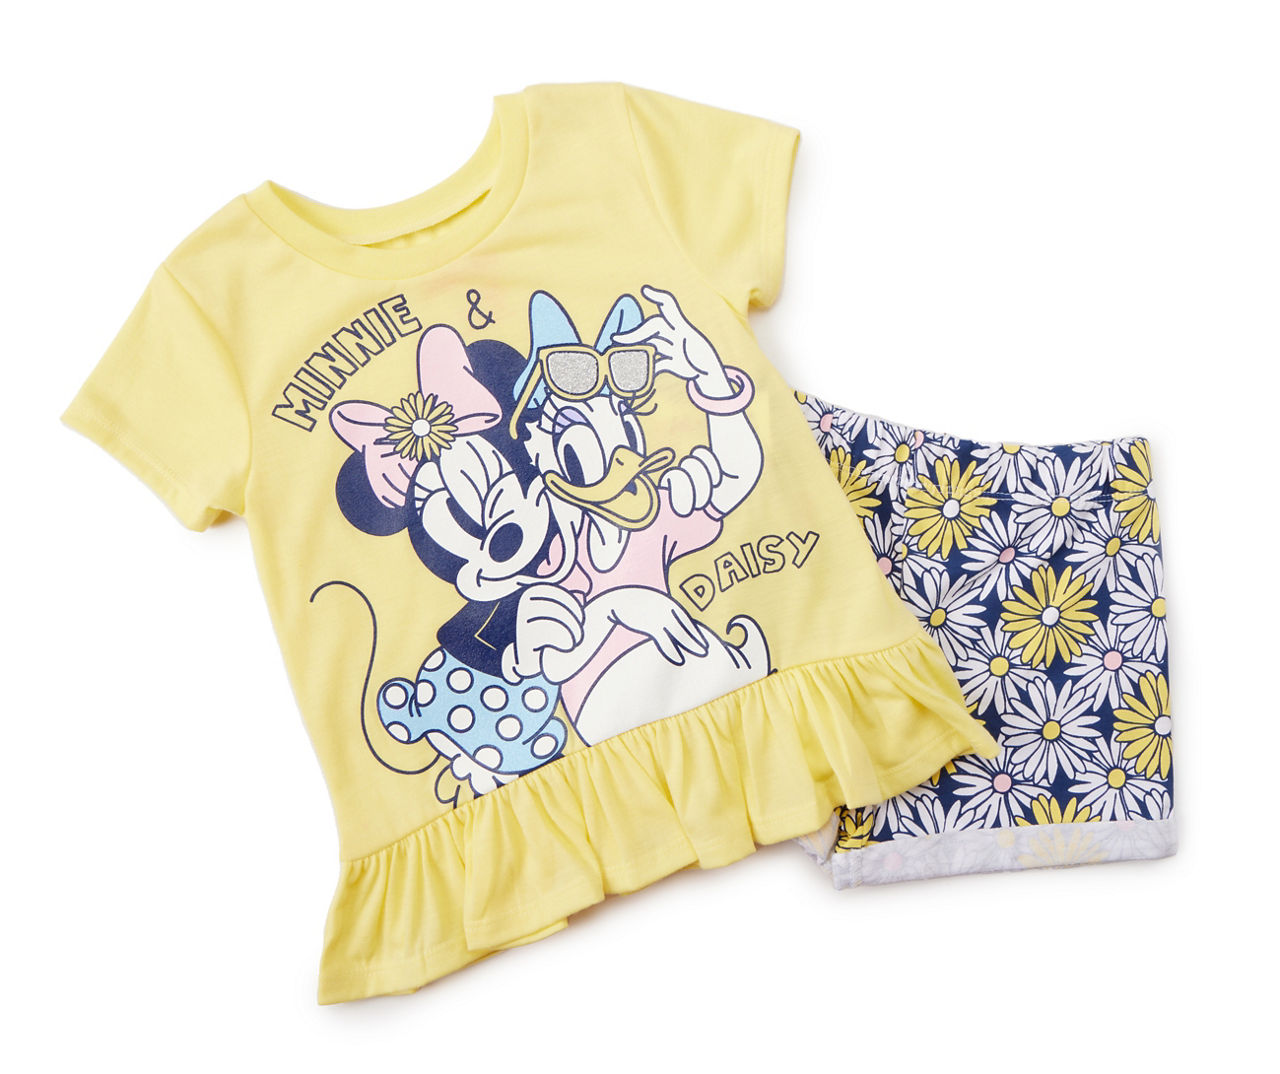 Toddler Size 3T Yellow Minnie & Daisy Ruffle Tee & Navy Floral Shorts